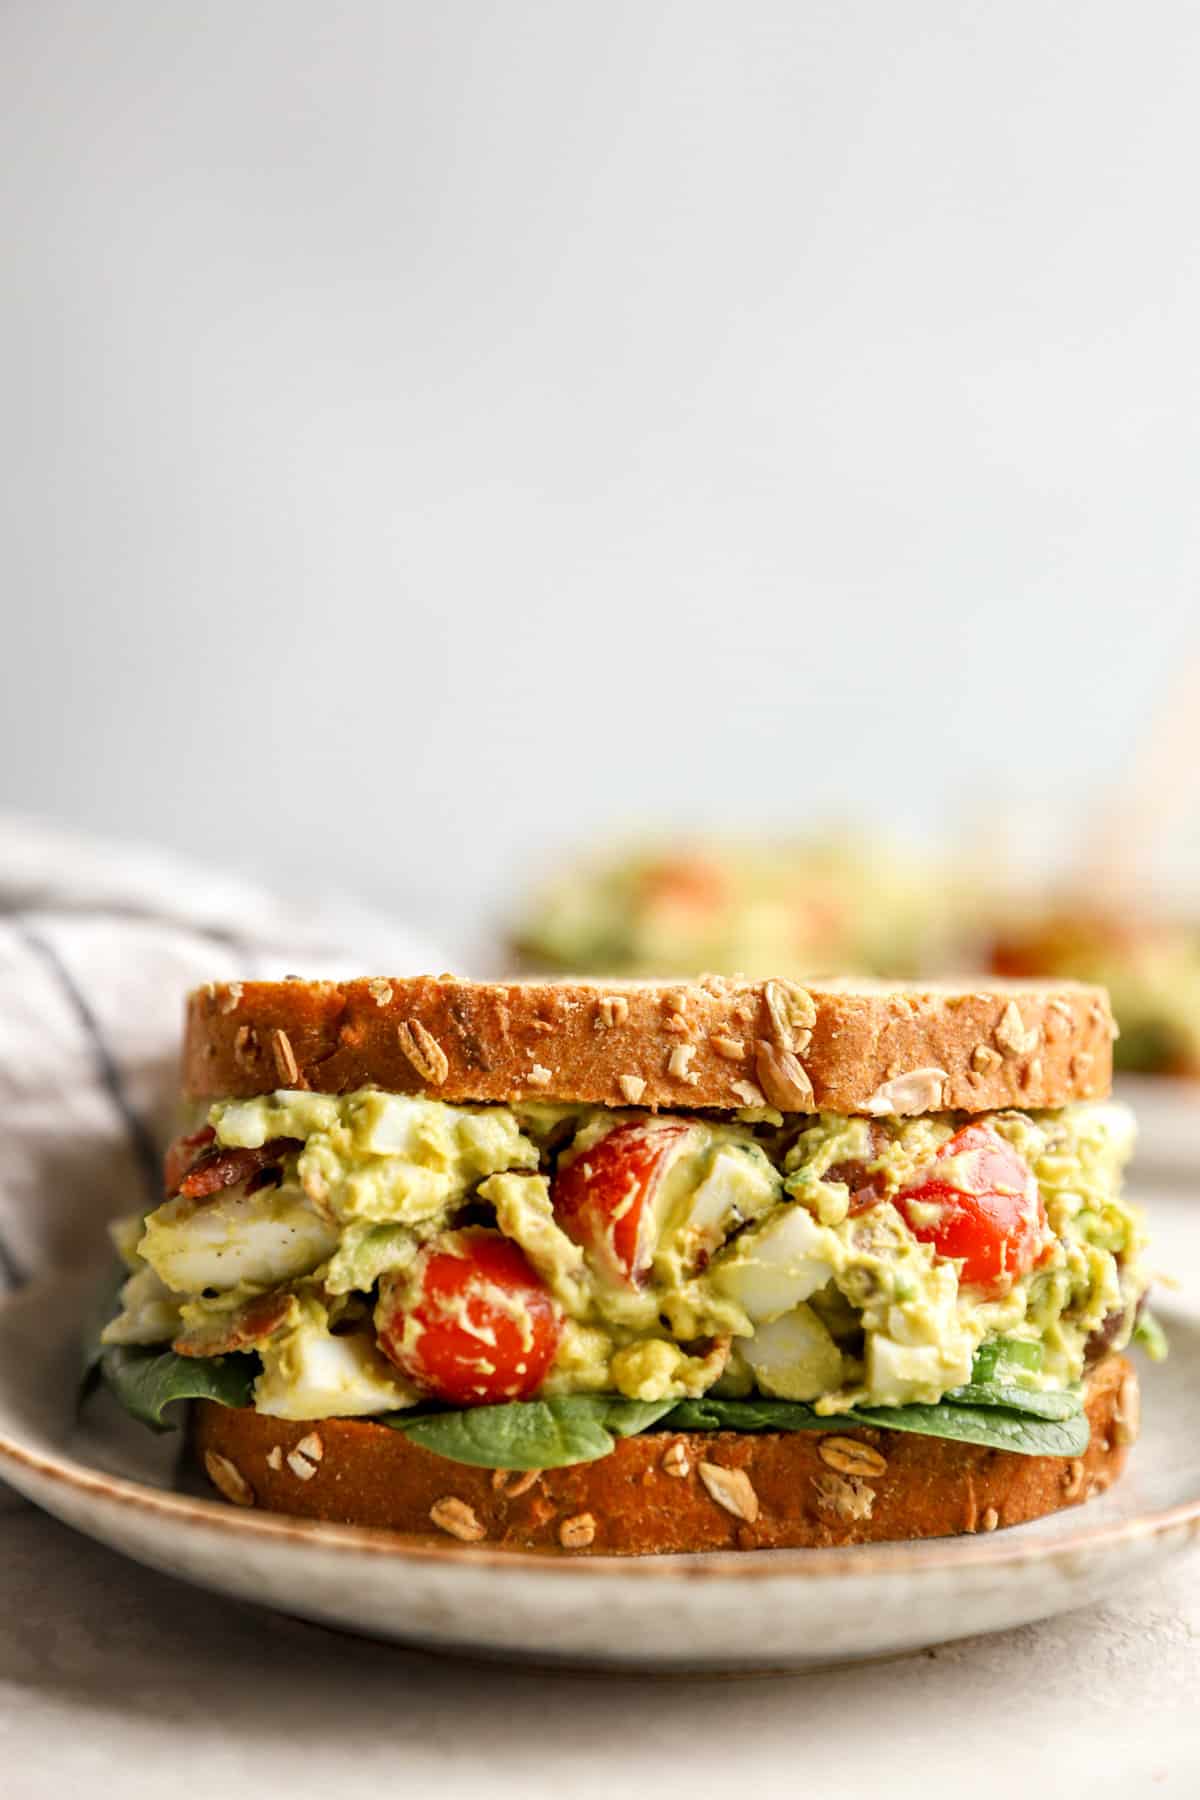 a side view of an egg salad sandwich.